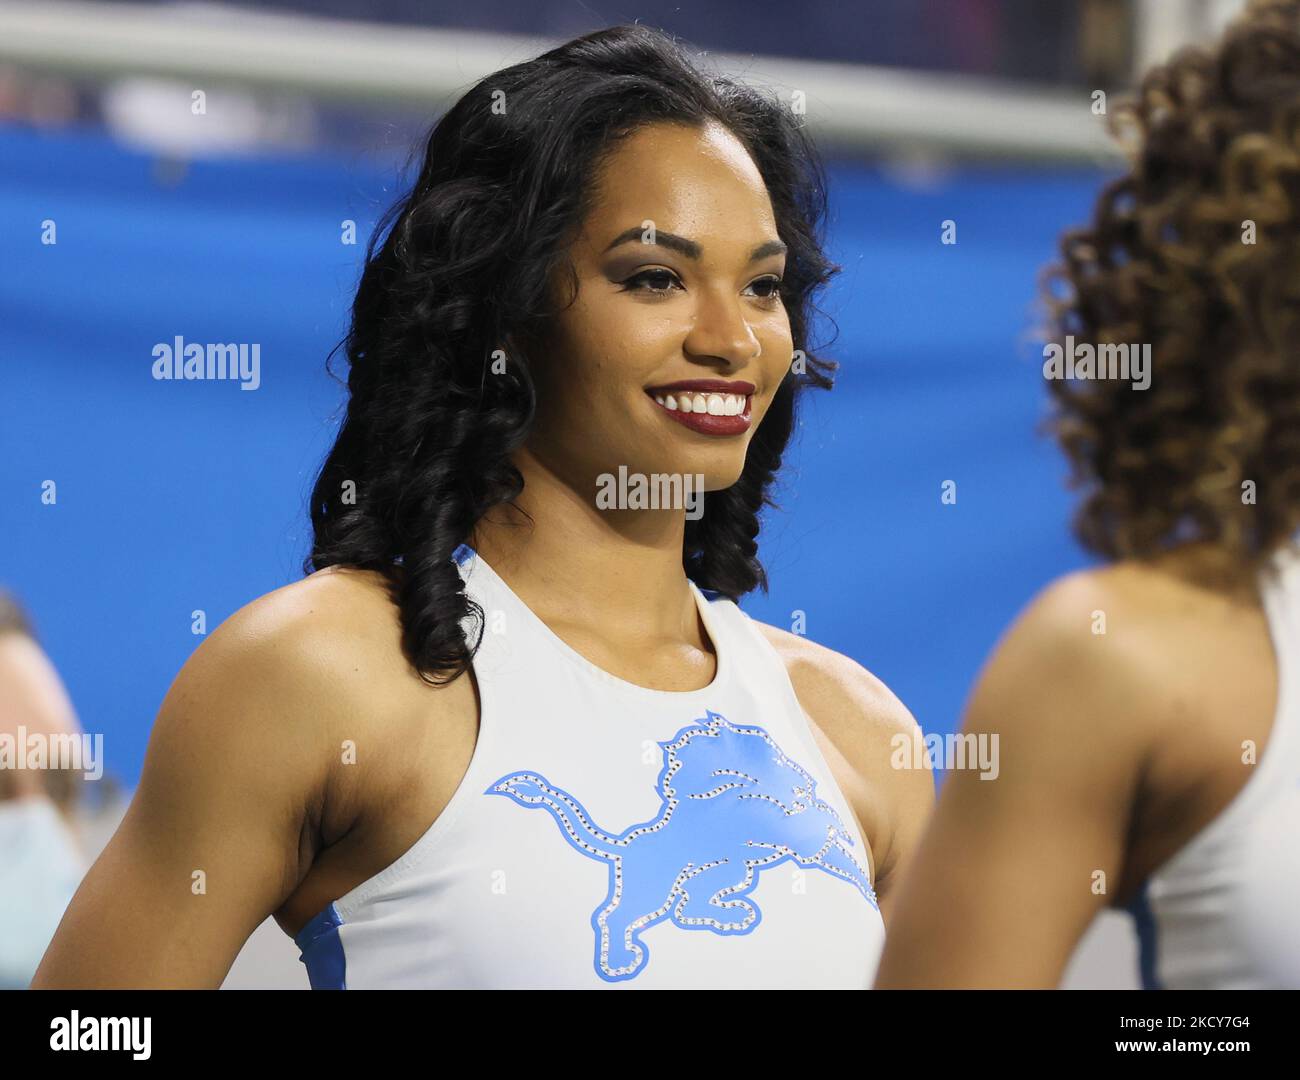 Detroit Lions cheerleaders perform on the sidelines during an NFL football game between the Detroit Lions and the Arizona Cardinals in Detroit, Michigan USA, on Sunday, December 19, 2021. (Photo by Amy Lemus/NurPhoto) Stock Photo